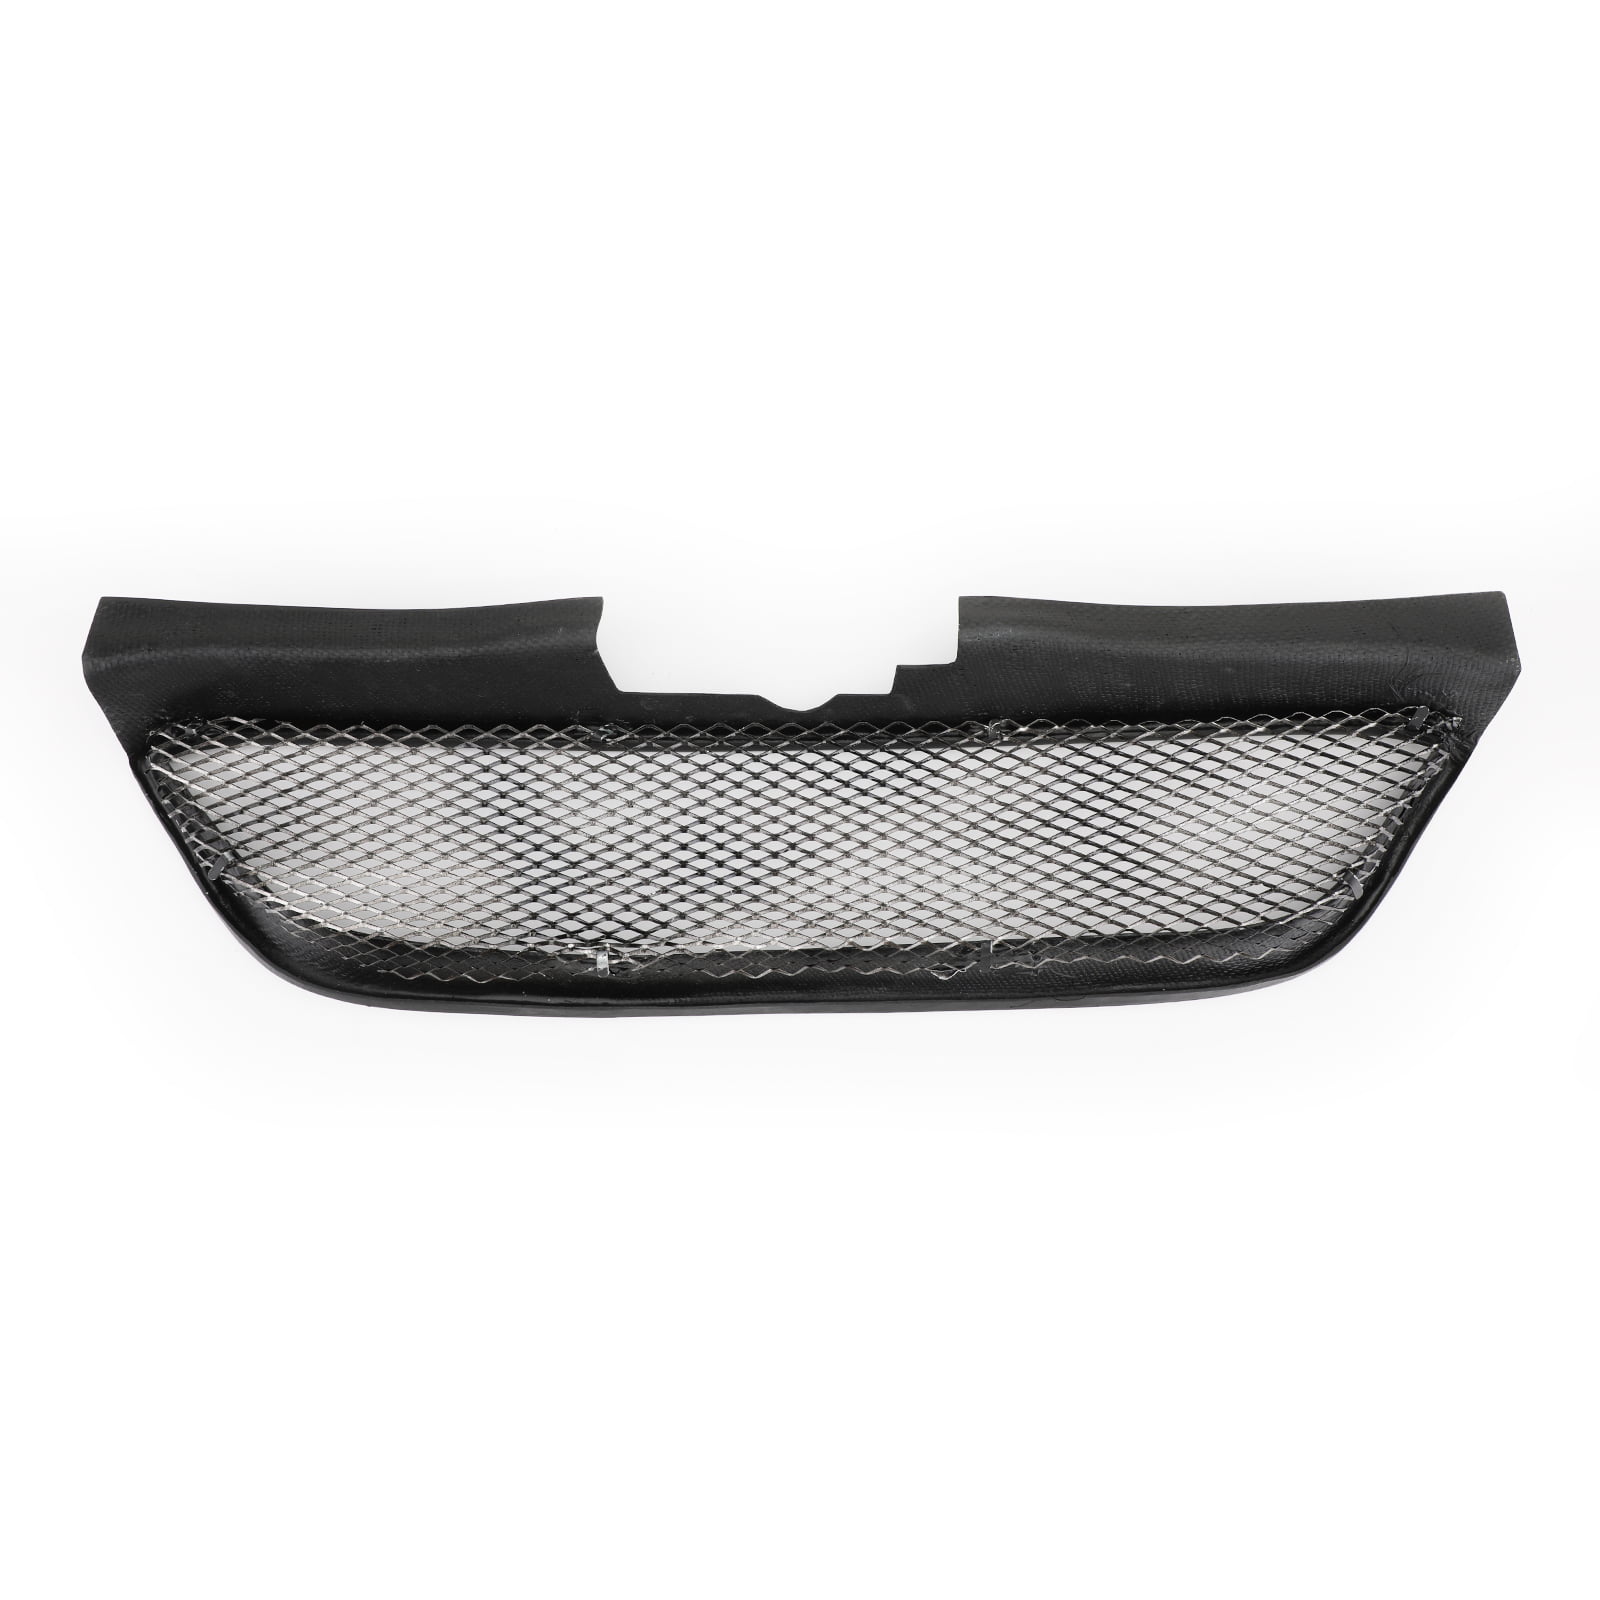 Car Front Mesh Grille Grill Cover Trim For 09 2008-2012 11 Hyundai Genesis Coupe 